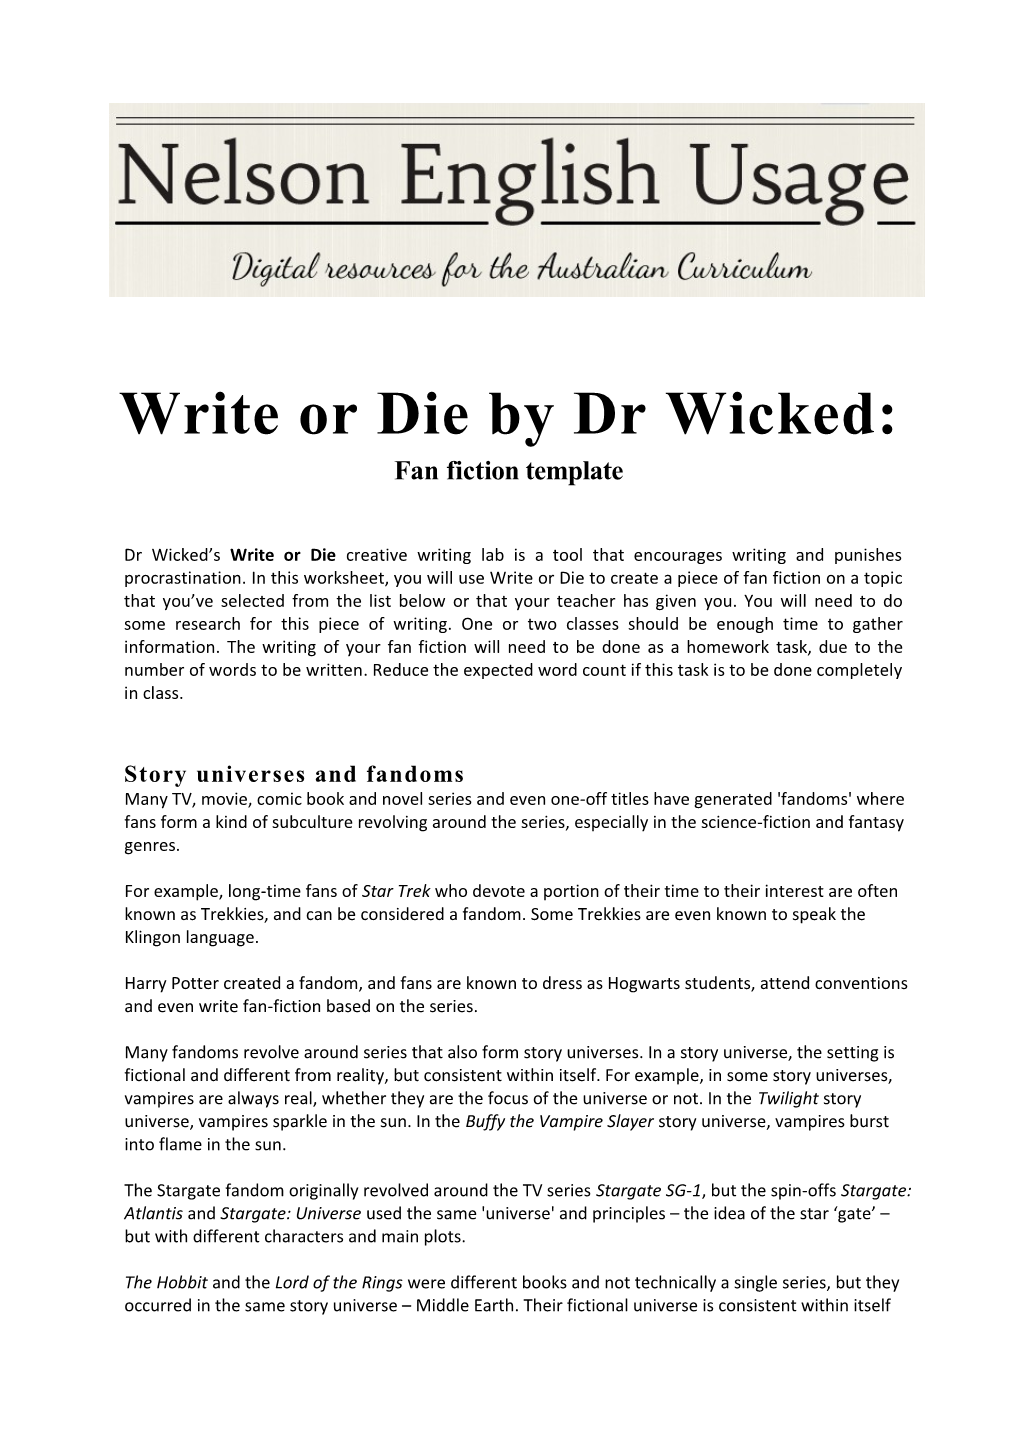 Write Or Die by Dr Wicked: Fan Fiction Template